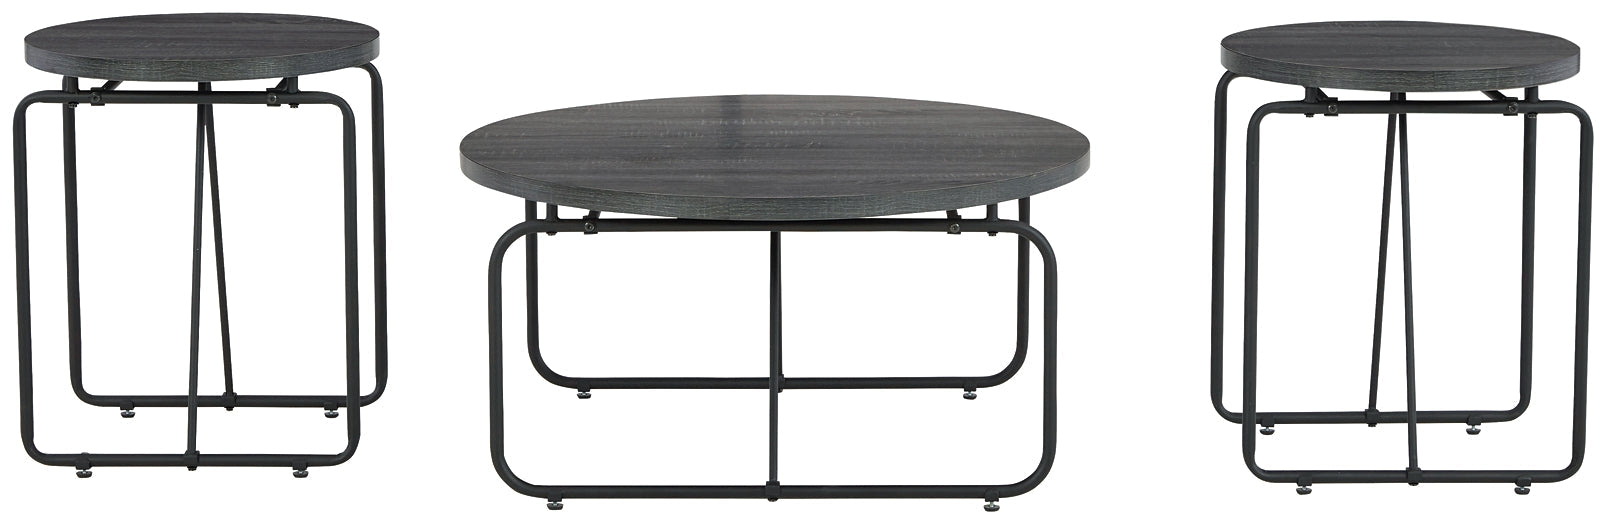 Garvine Occasional Table (Set of 3)